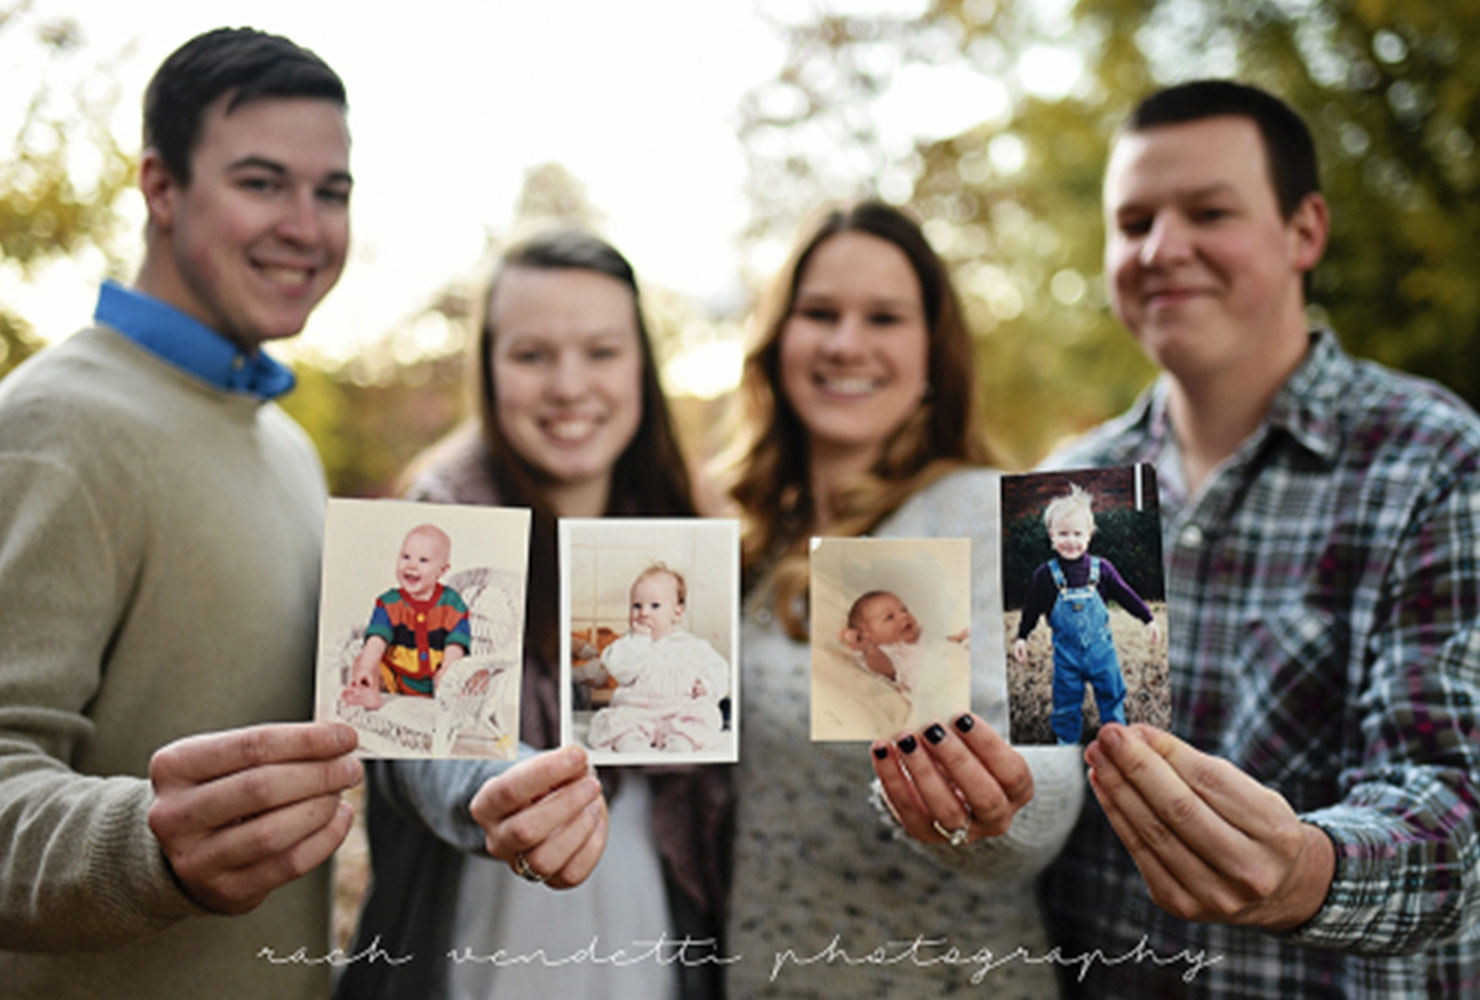 sibling photo ideas holding baby photos